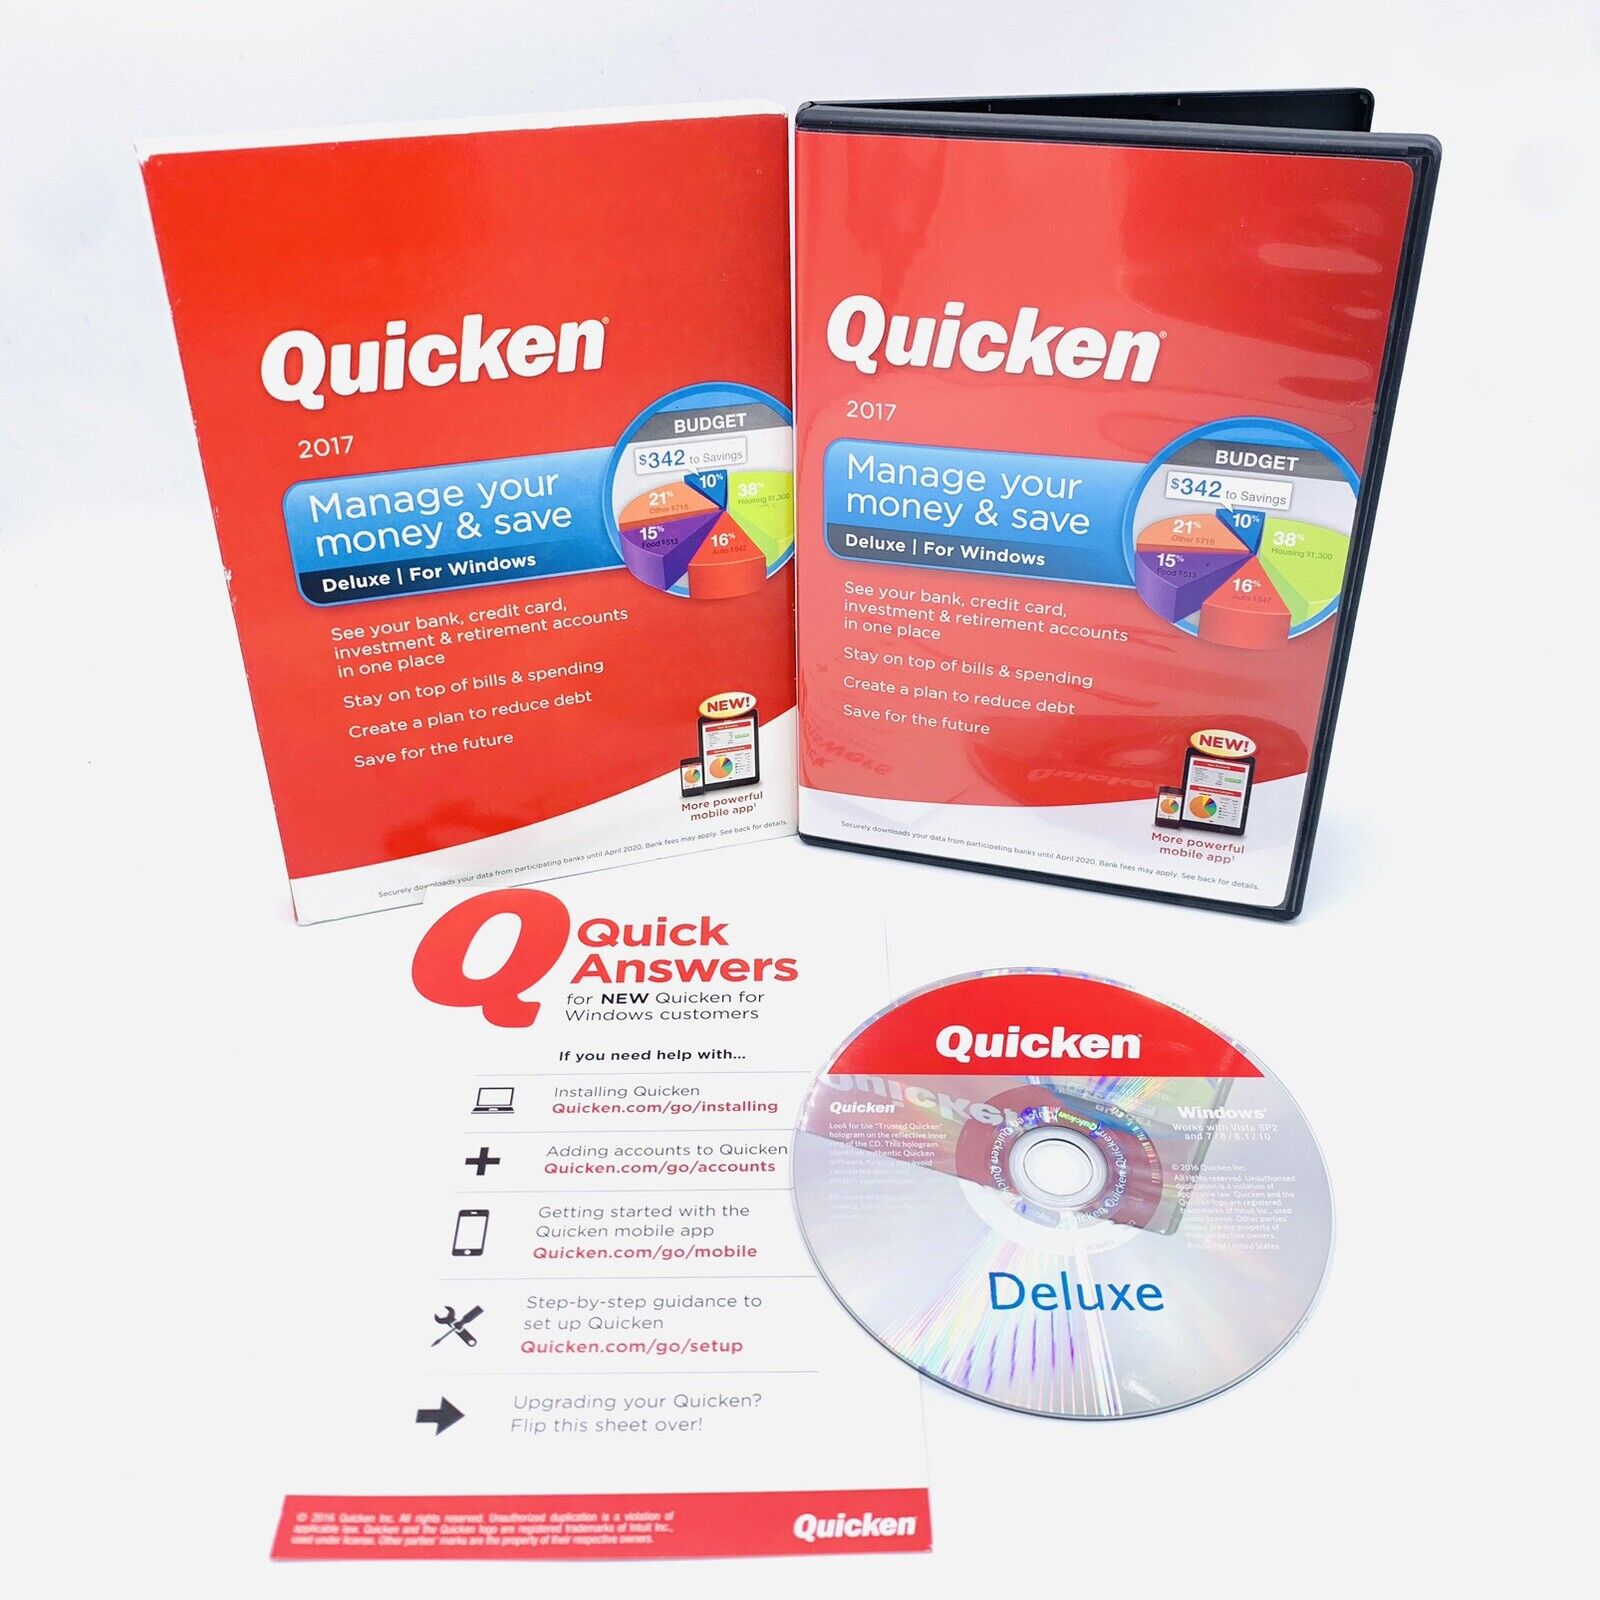 Quicken Deluxe  2017 Manage Your Money and Save For Windows PC, Fast 